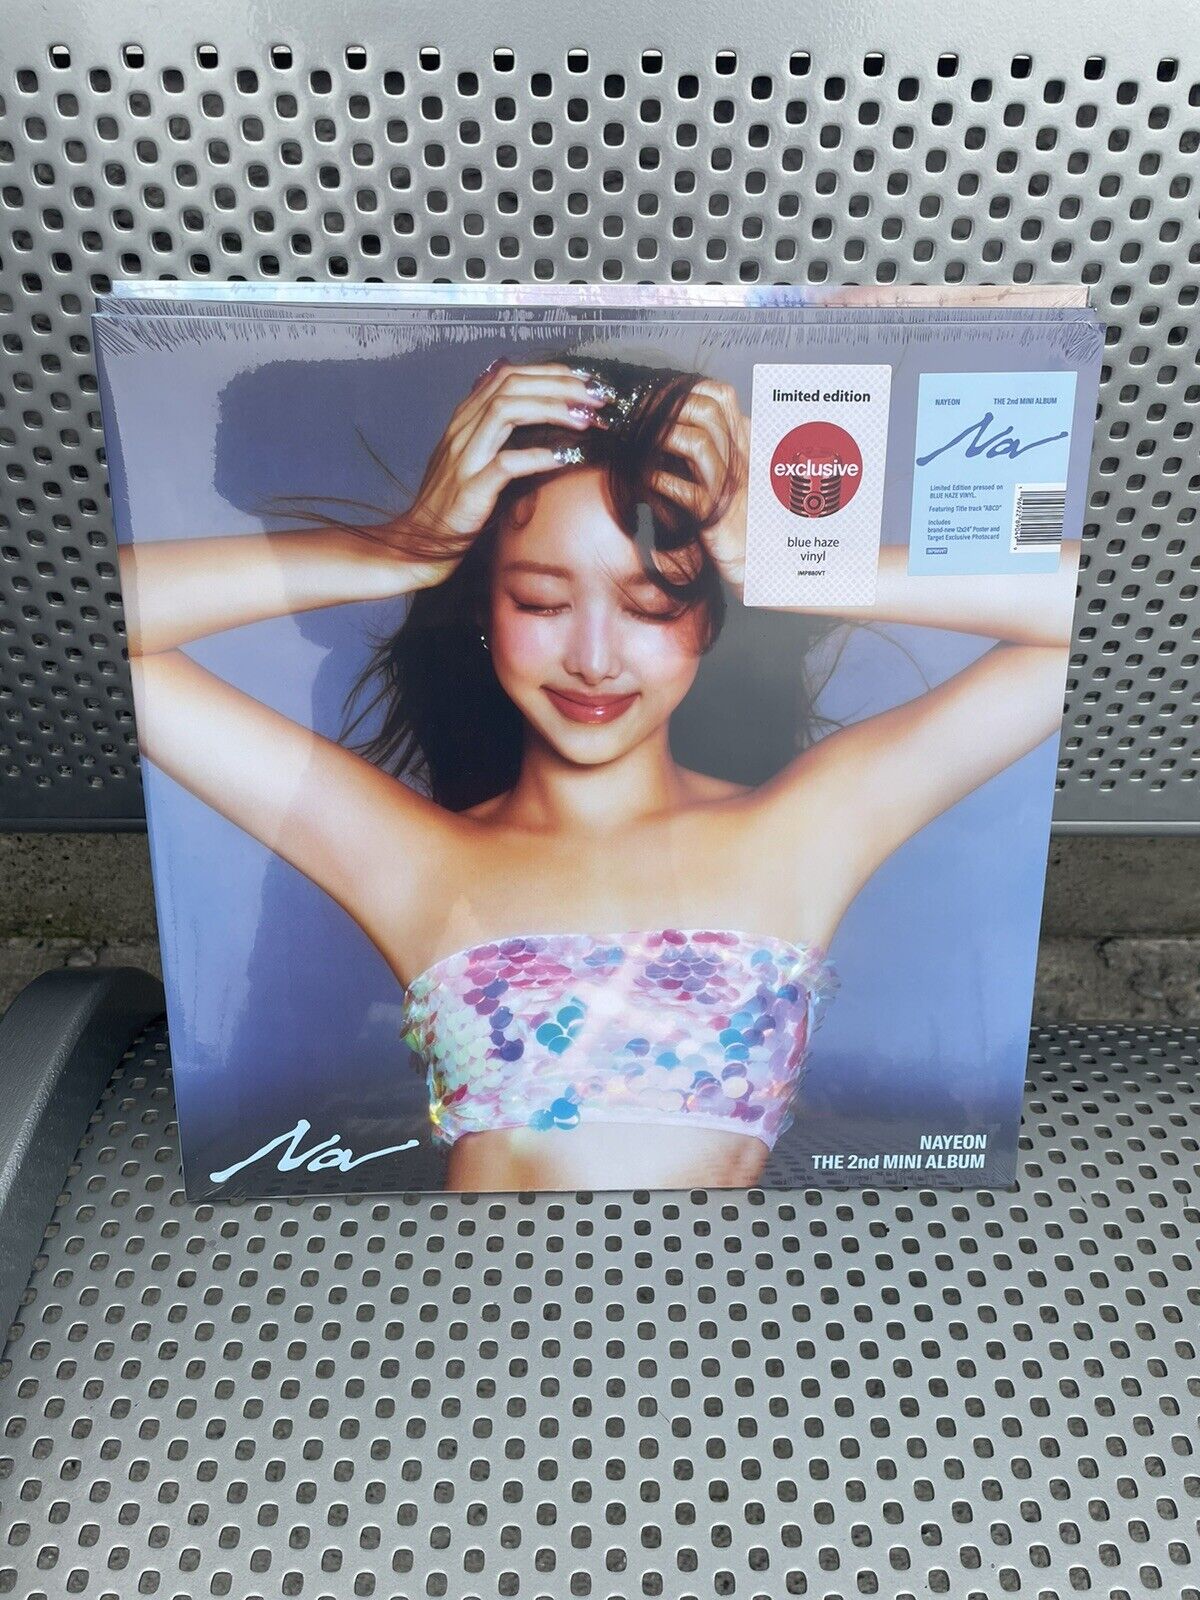 *IN HAND* SHIPS SAME DAY* NAYEON TWICE NA LIMITED EXCLUSIVE BLUE HAZE VINYL LP